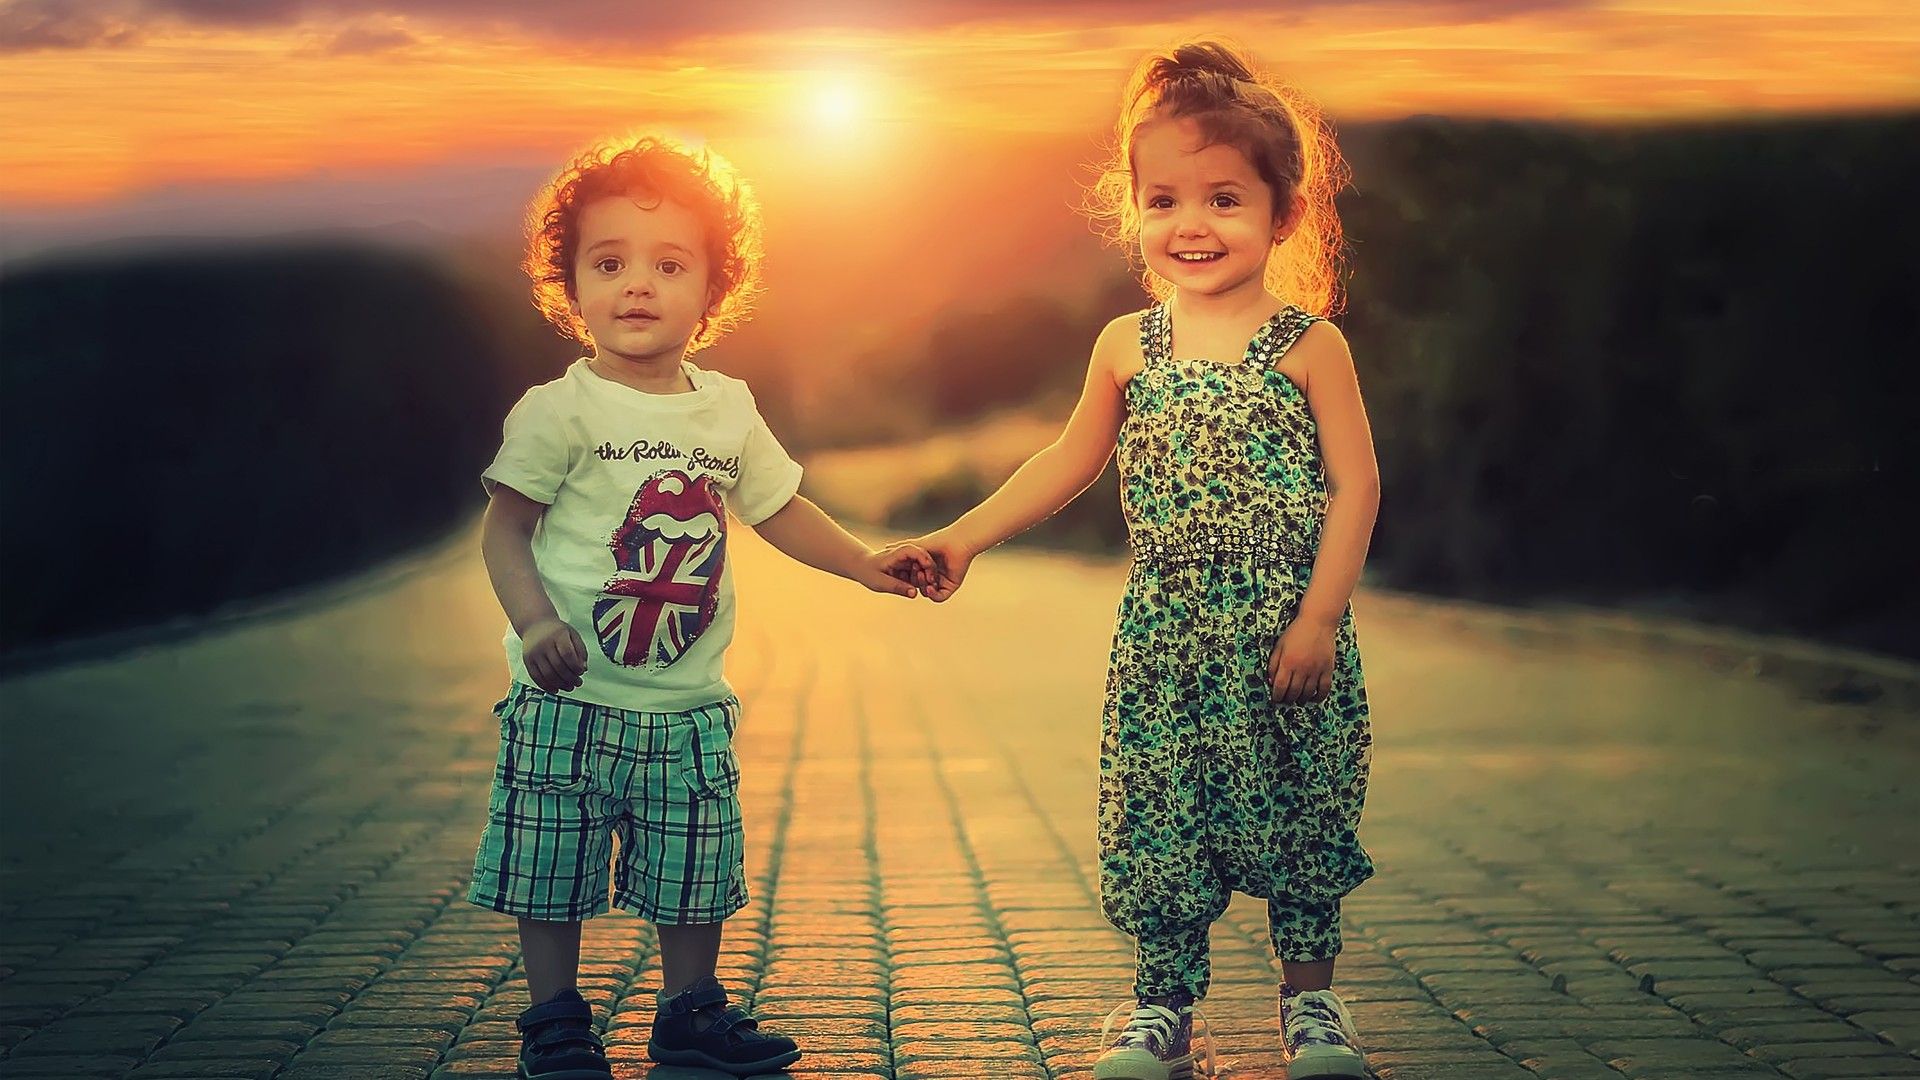 cute love baby couple wallpapers for mobile